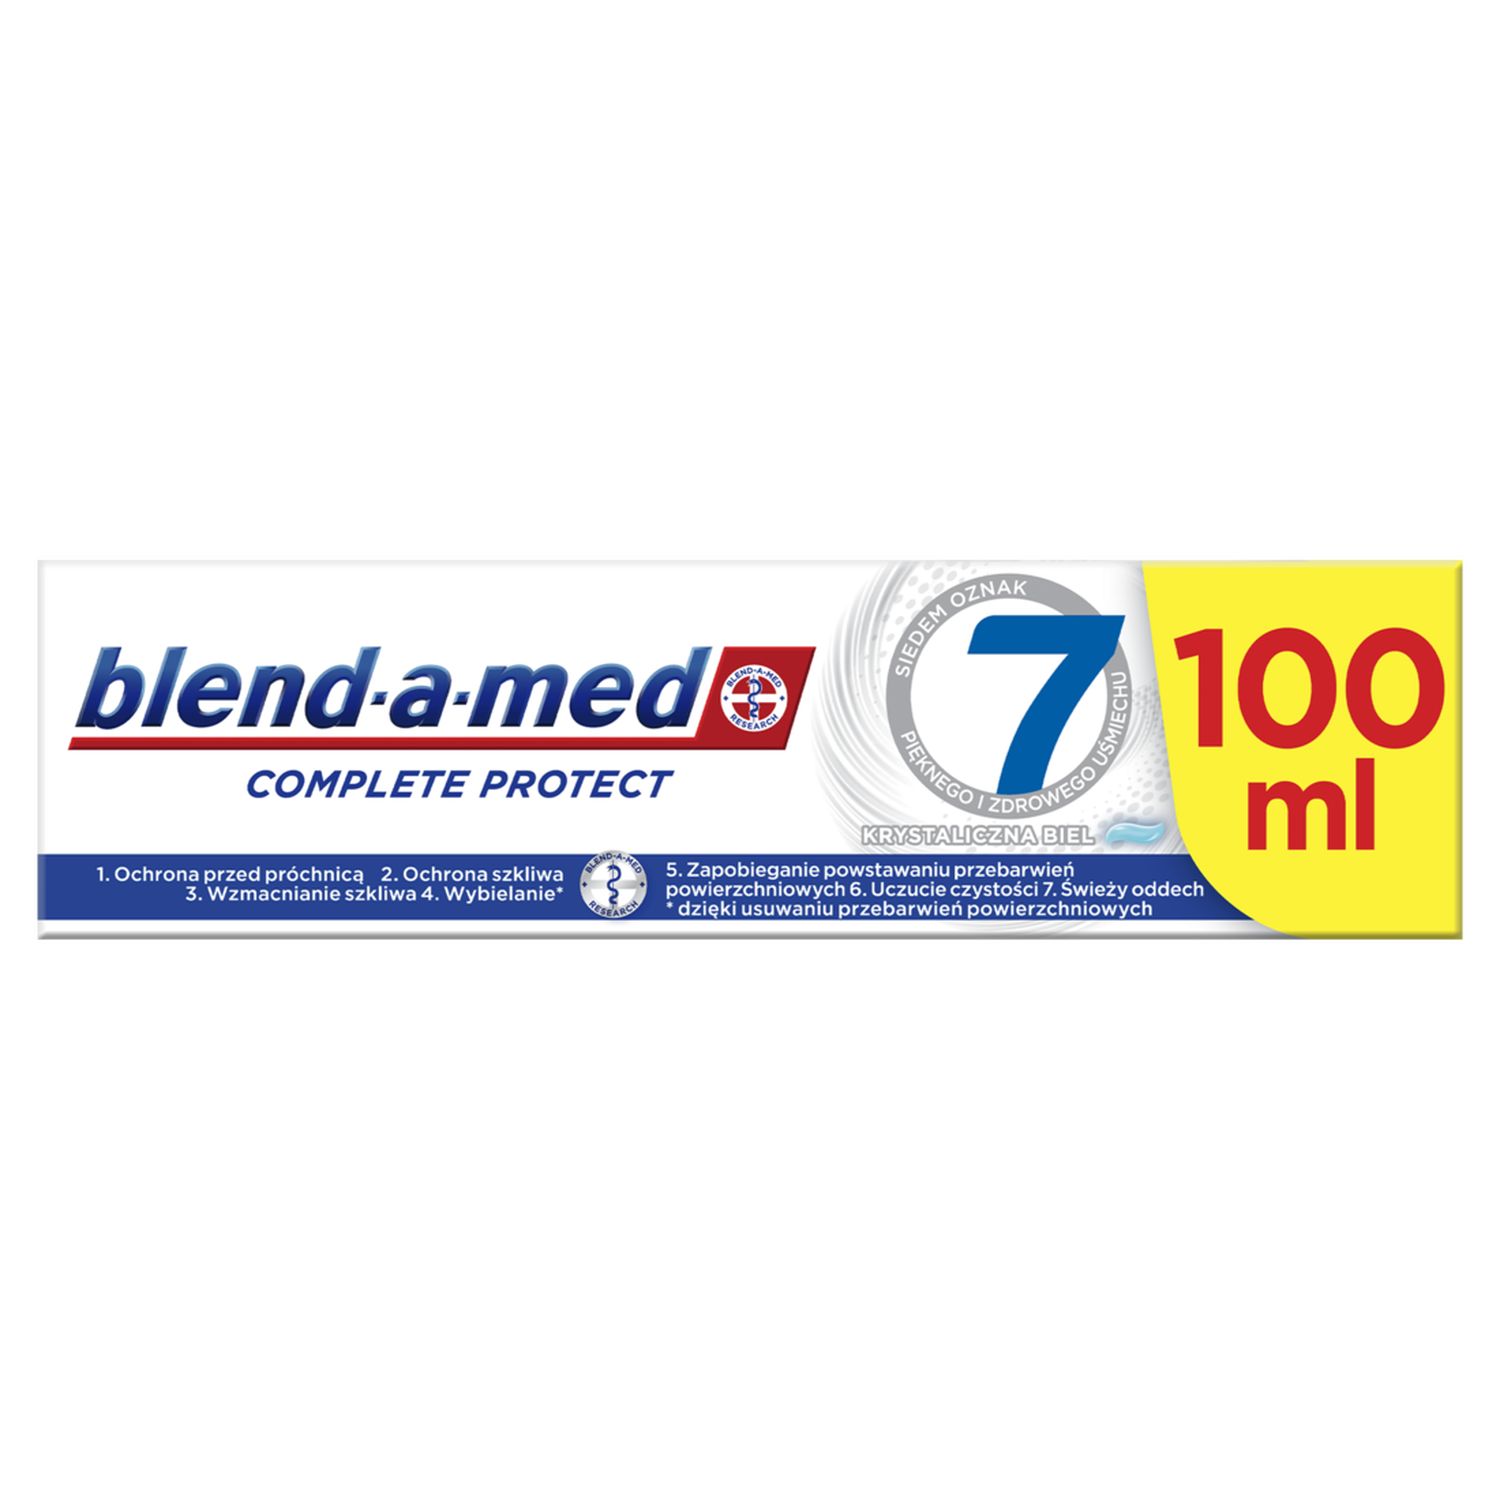 Зубна паста Blend-a-med Complete Protect 7 Кришталева білизна 100 мл - фото 3